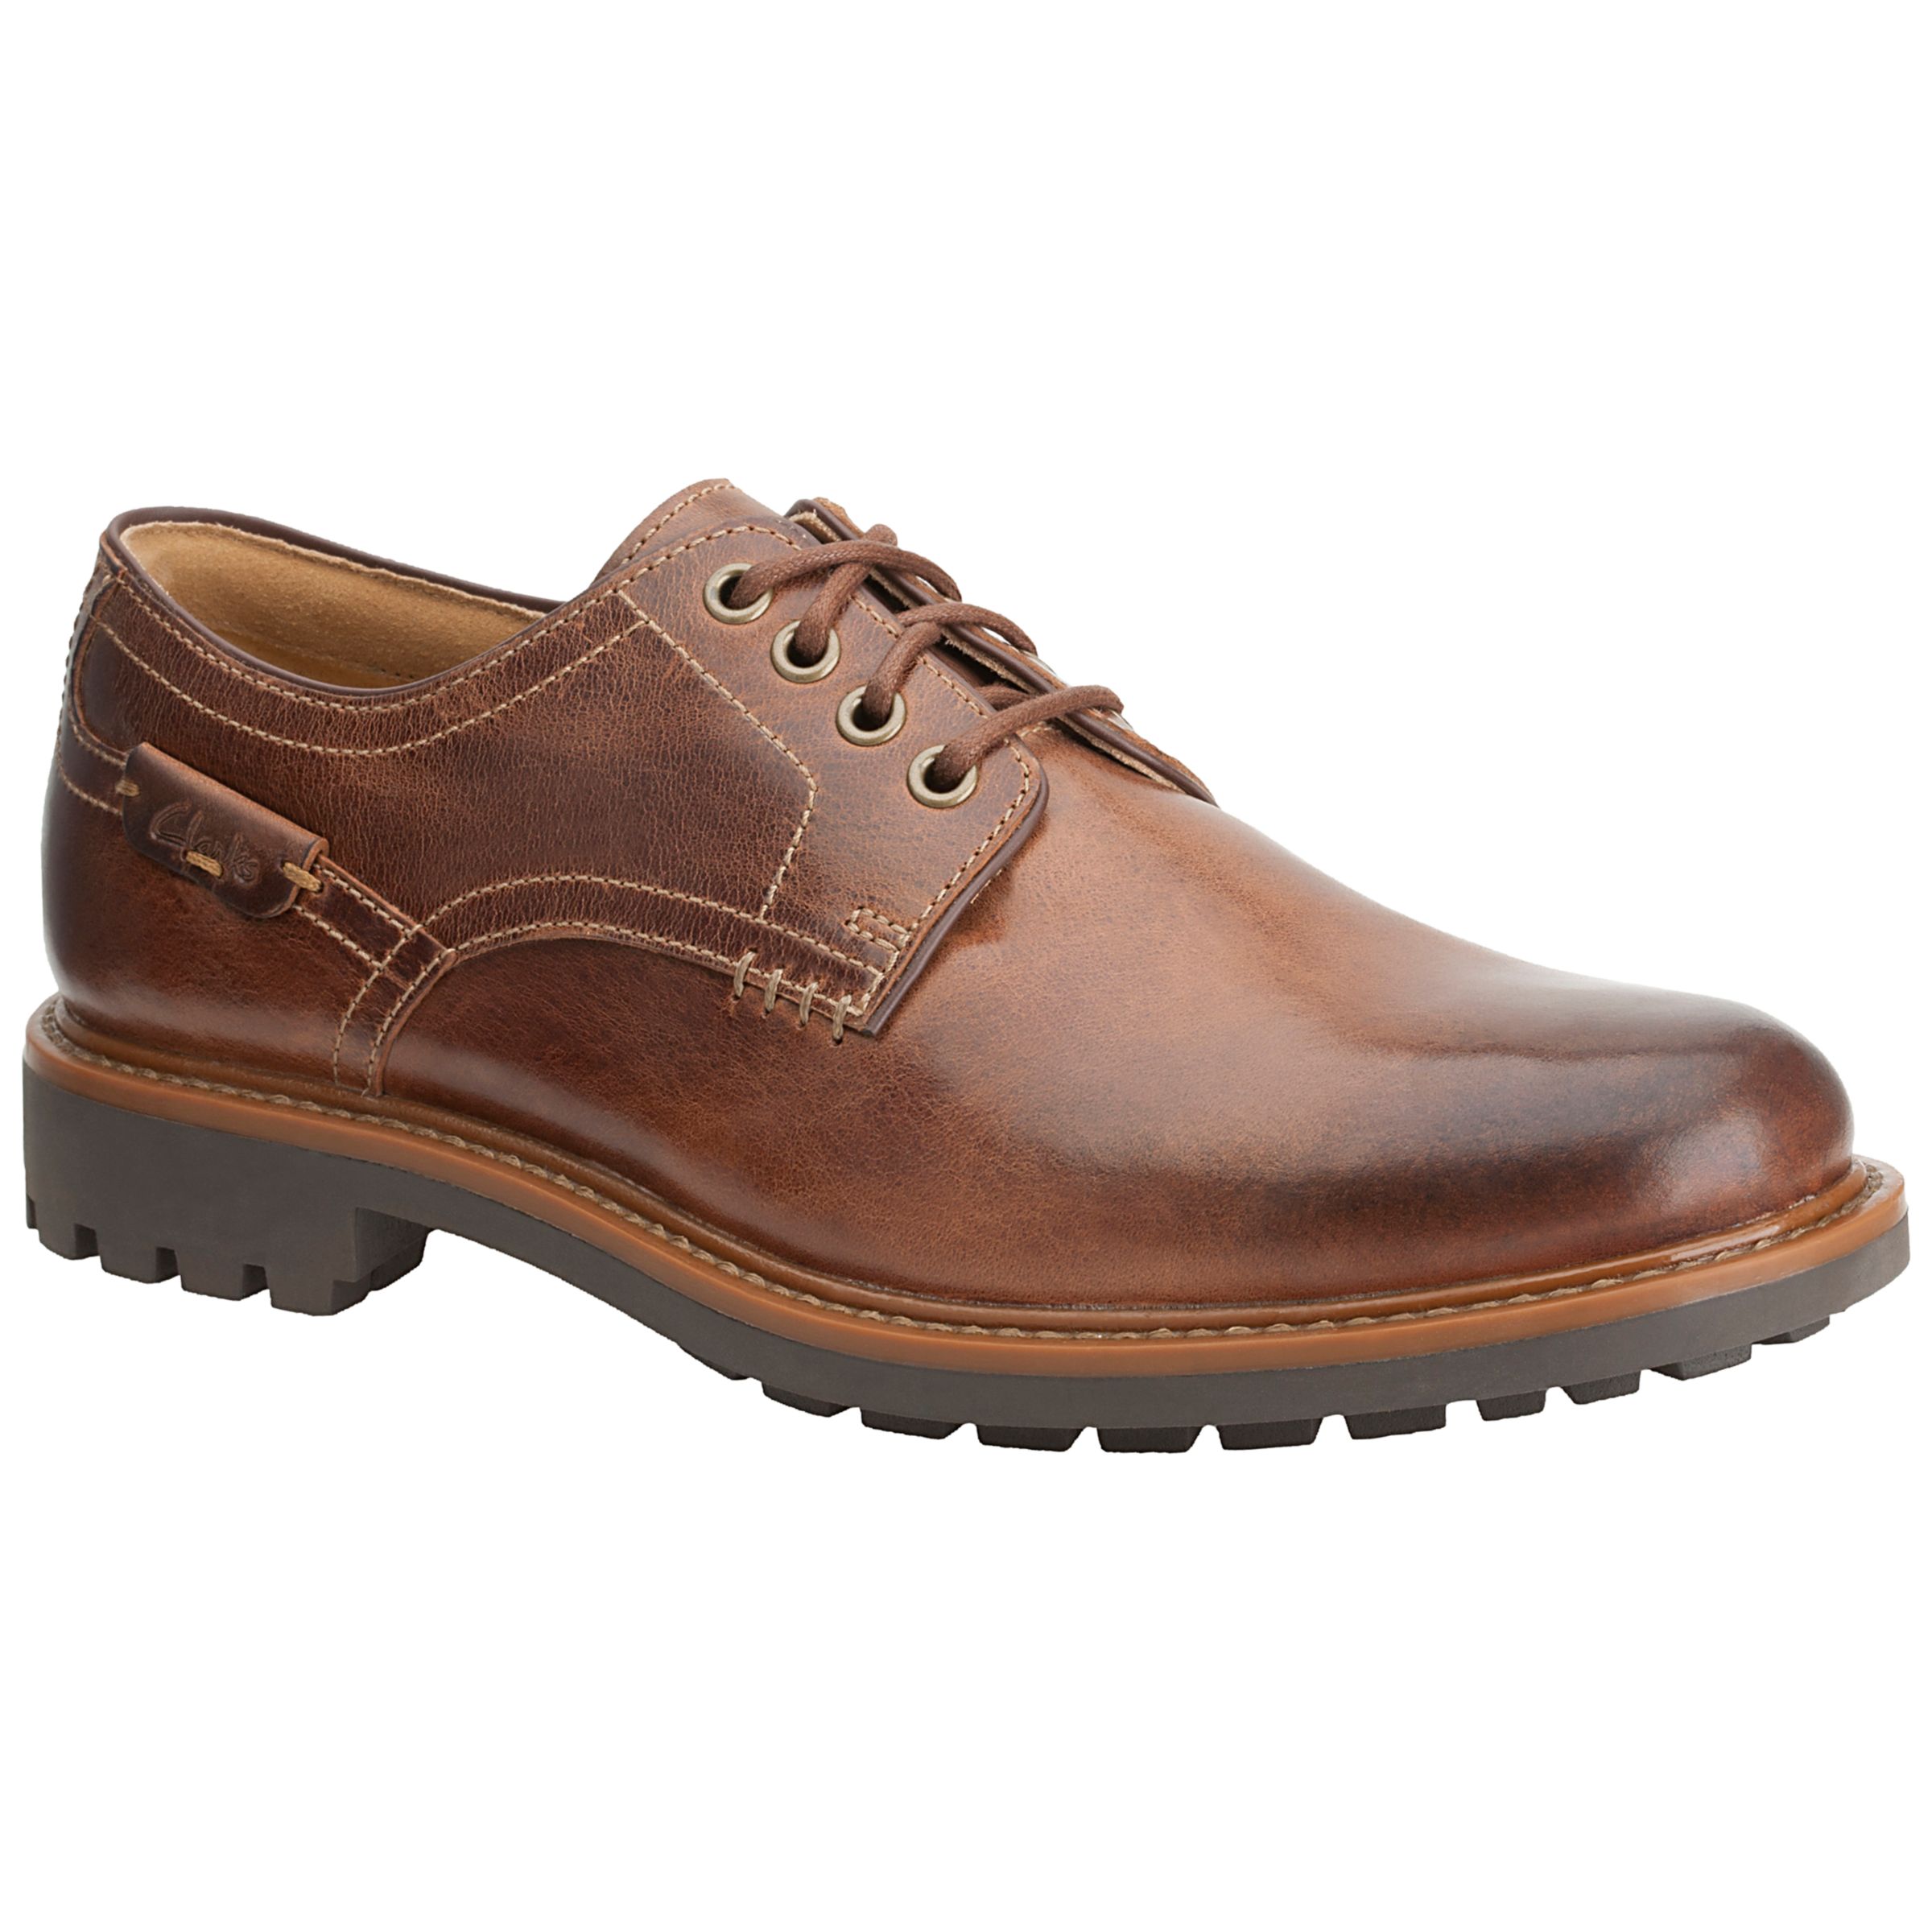 Buy Clarks Montacute Hall Leather Derby Shoes Online at johnlewis